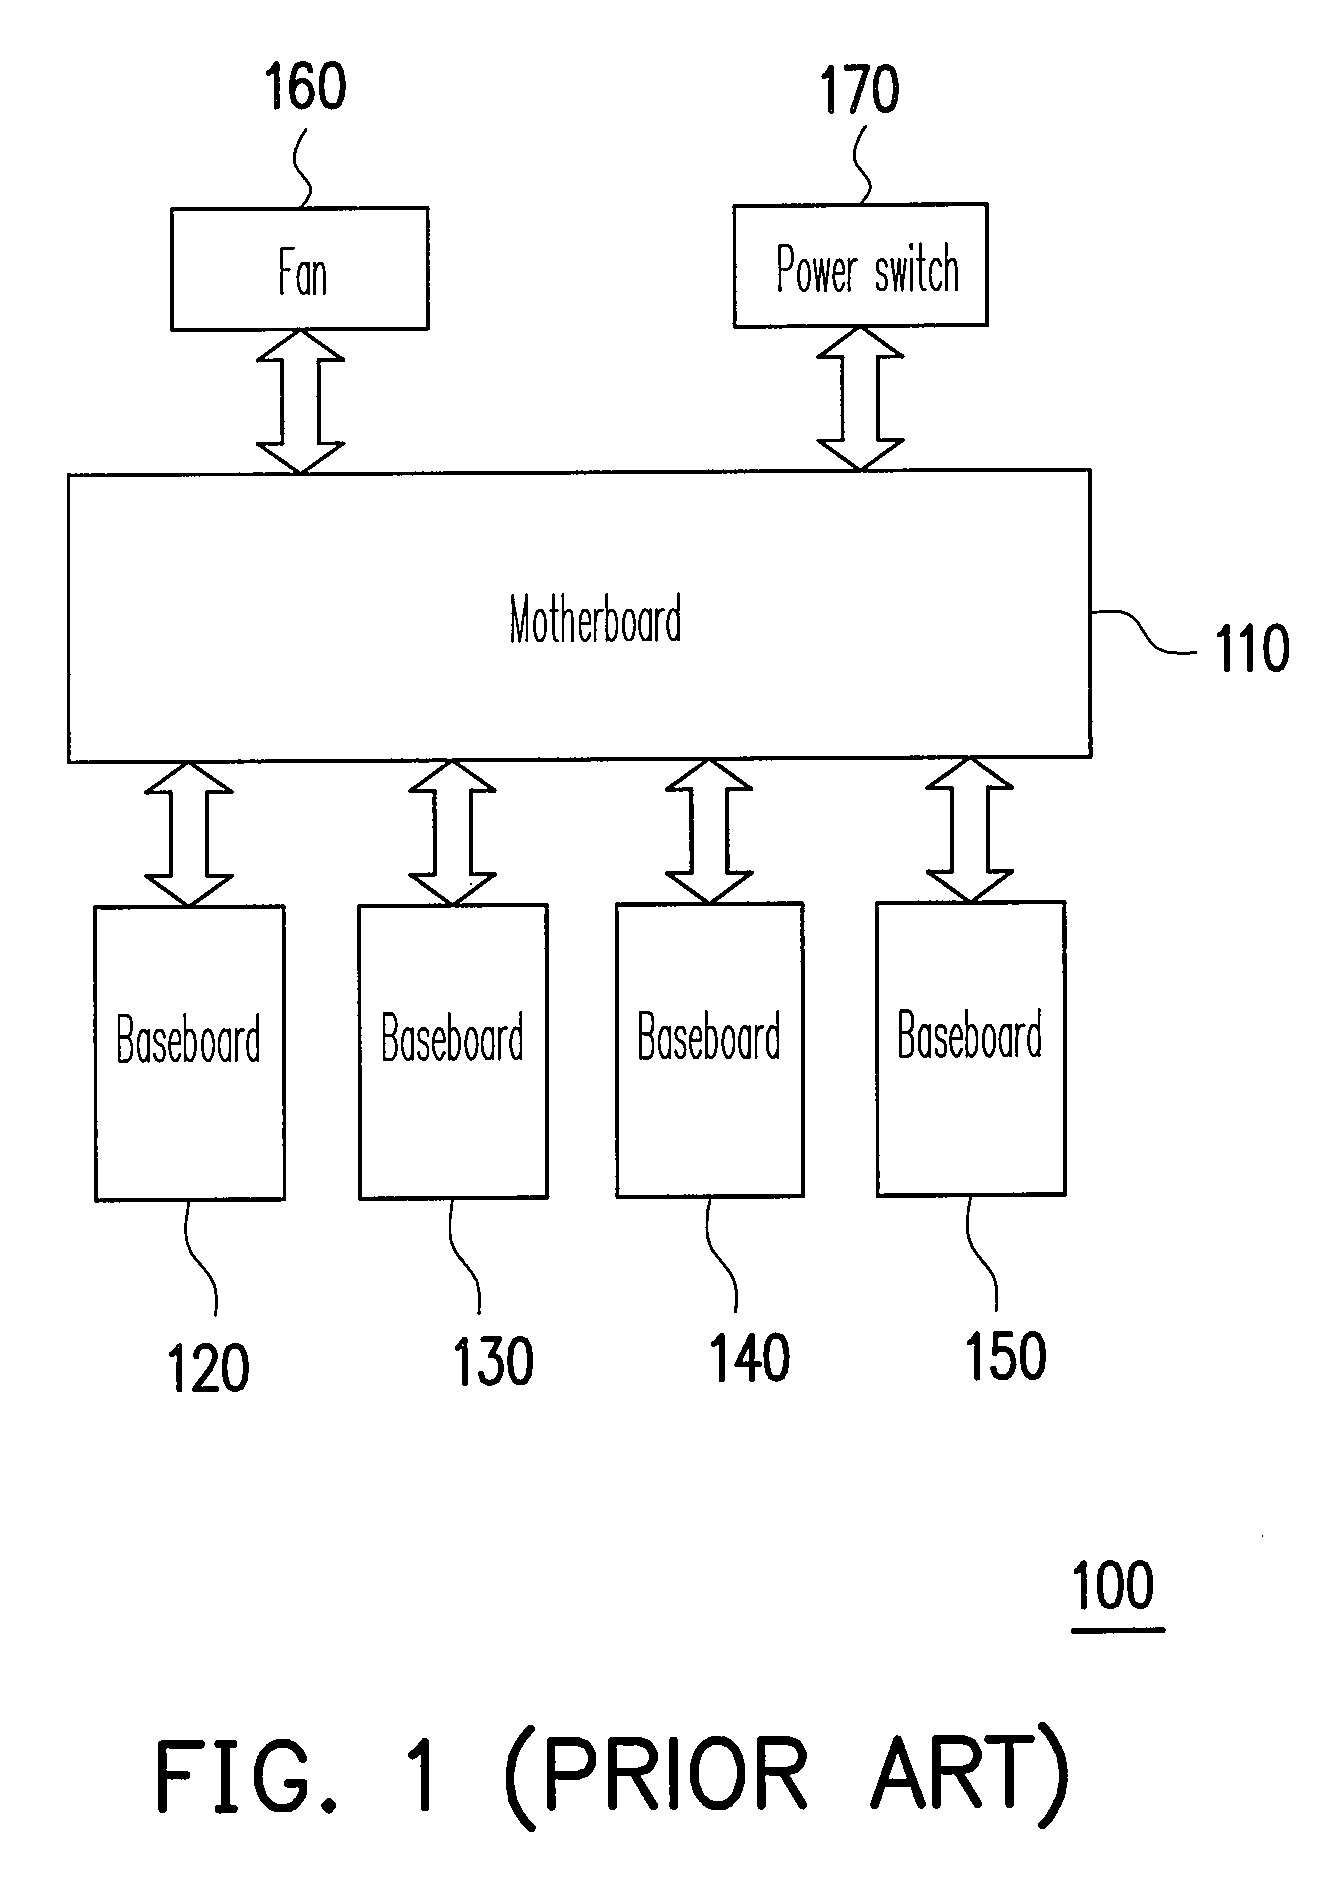 Apparatus and method for computer management